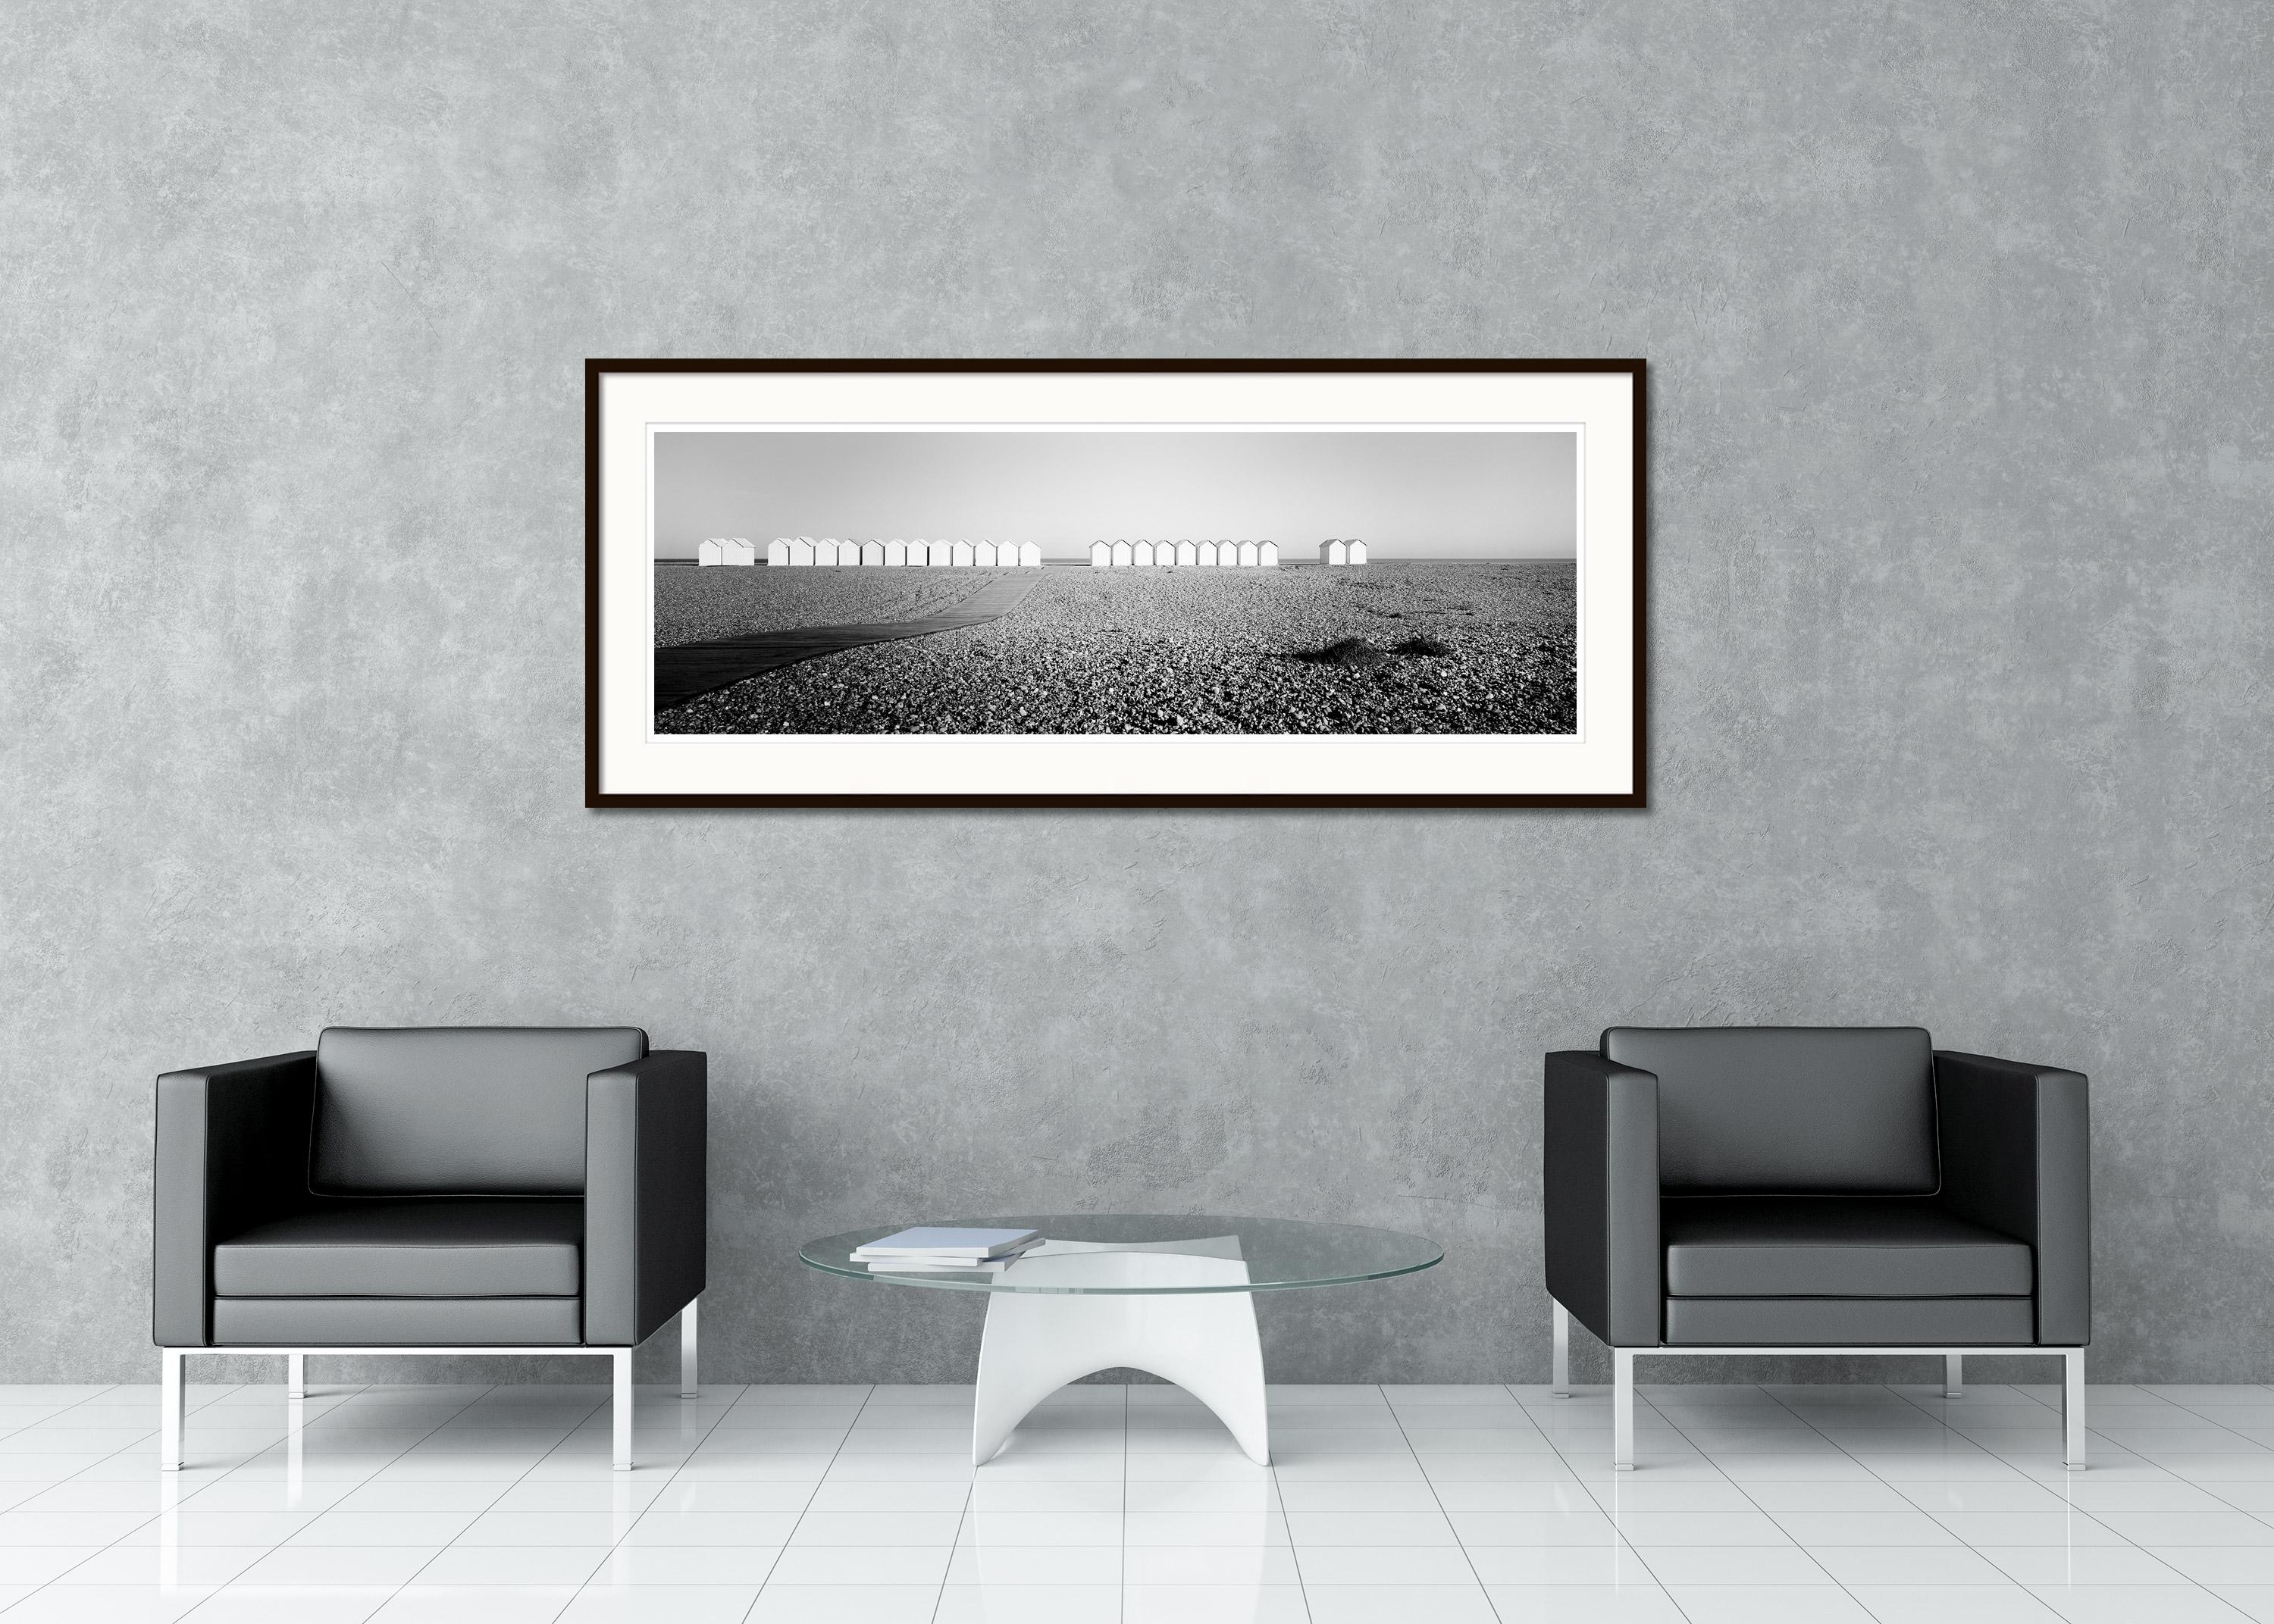 Black and White Fine Art panorama photography - Single tree on field with impressive clouds, Austria. Archival pigment ink print, edition of 9. Signed, titled, dated and numbered by artist. Certificate of authenticity included. Printed with 4cm